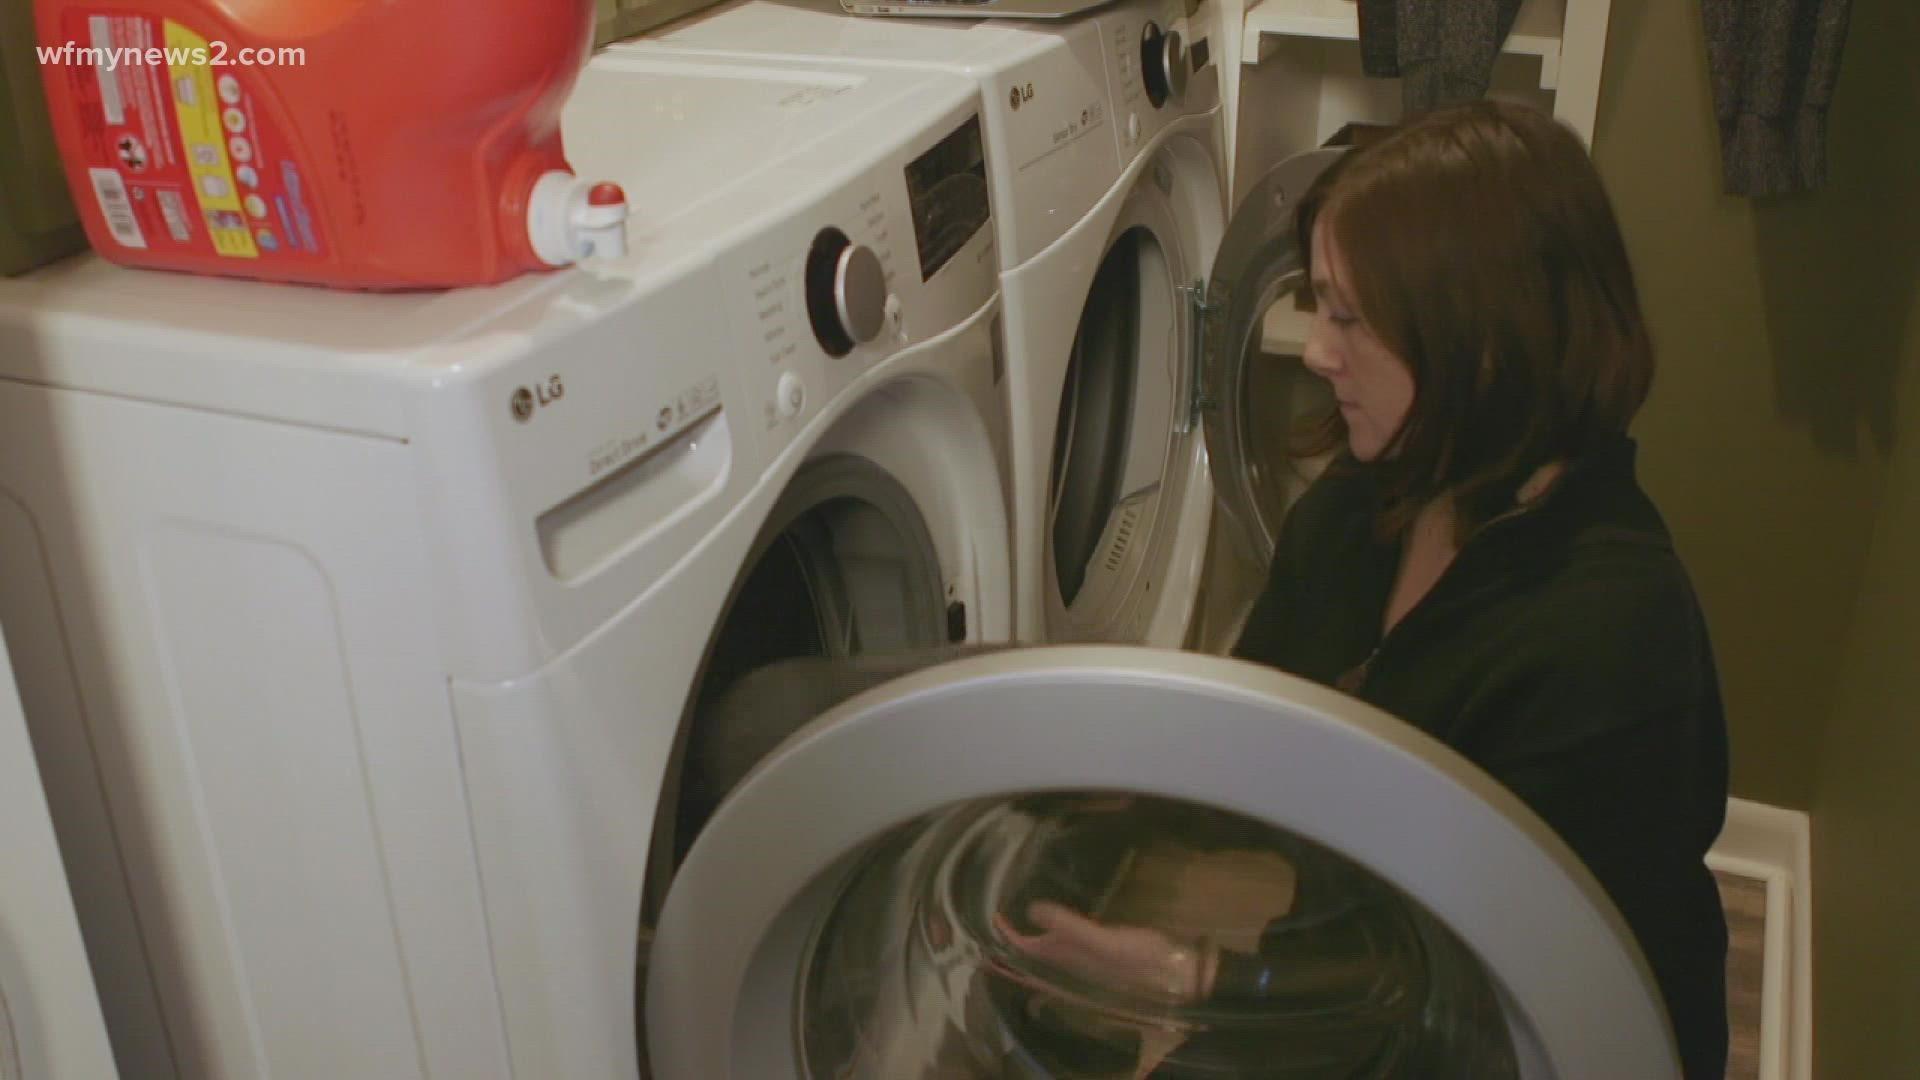 Consumer Reports shares the proper ways to wash your clothes to protect your wardrobe from wearing out too quickly.